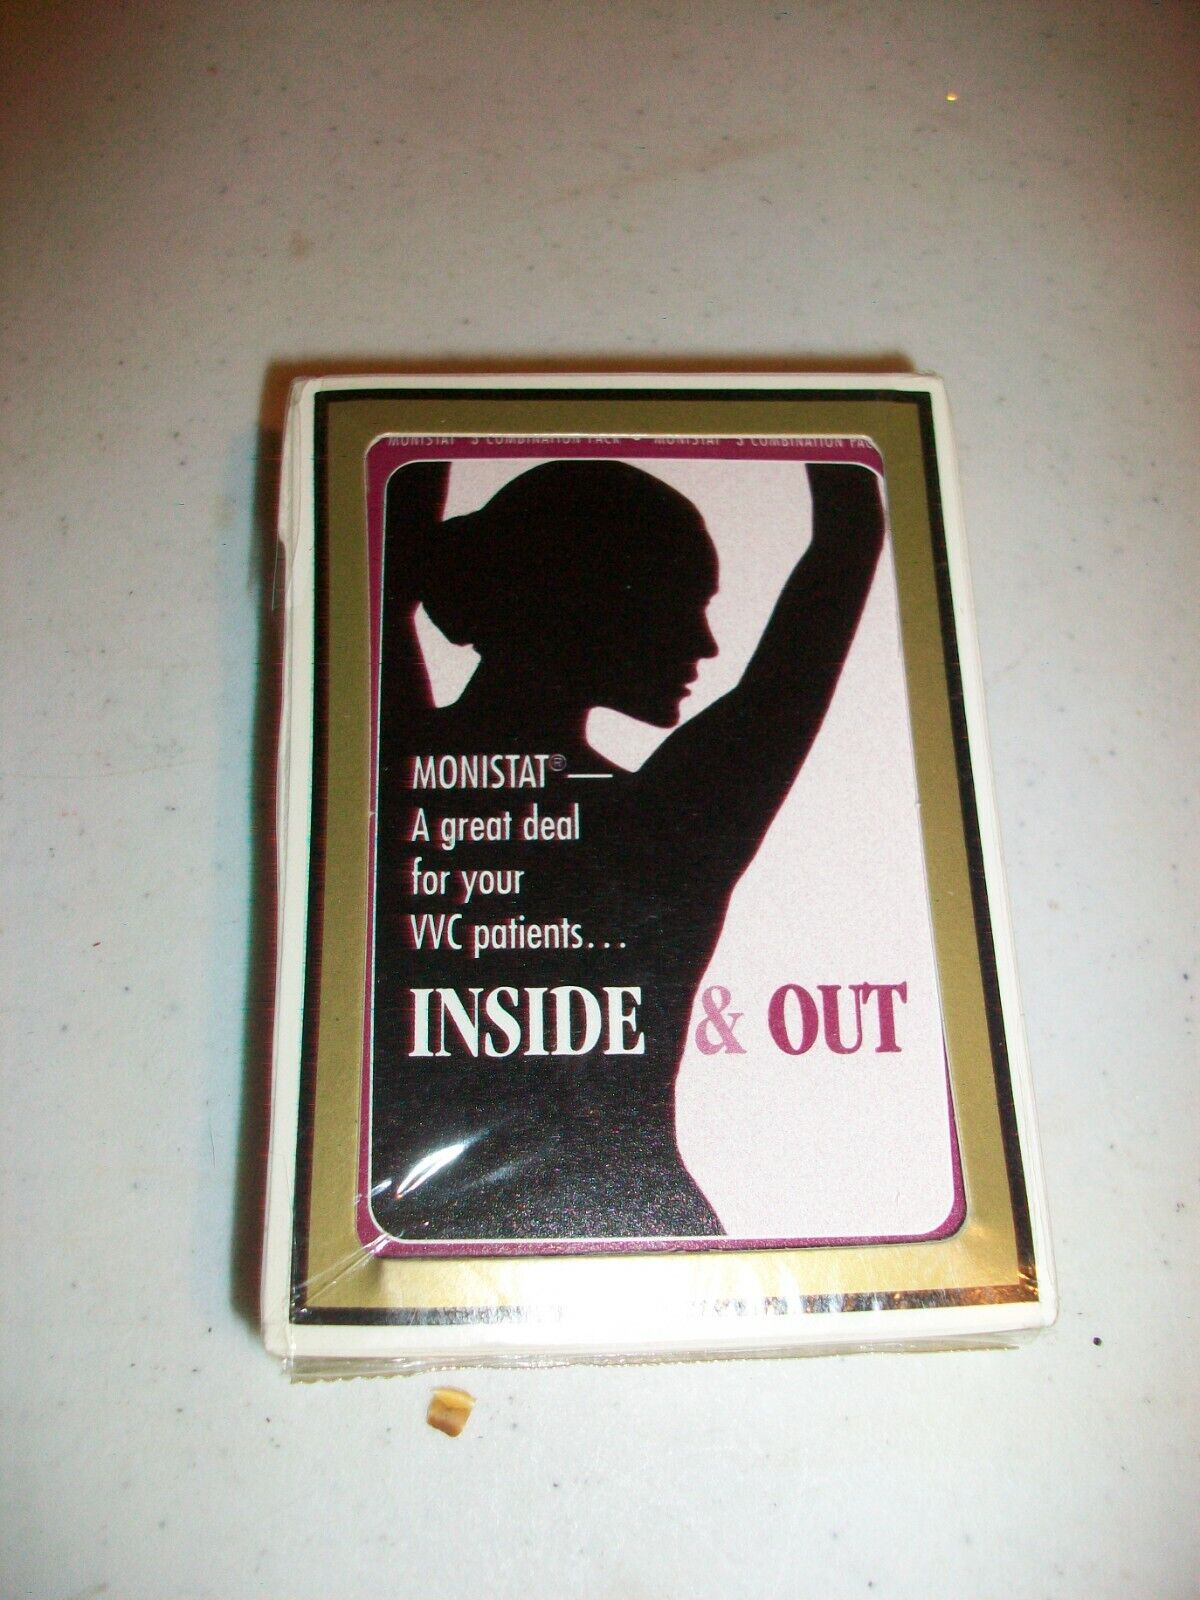 SEALED DECK PLAYING CARDS - MONISTAT - INSIDE & OUT - ADVERTISING DECK - NEW 